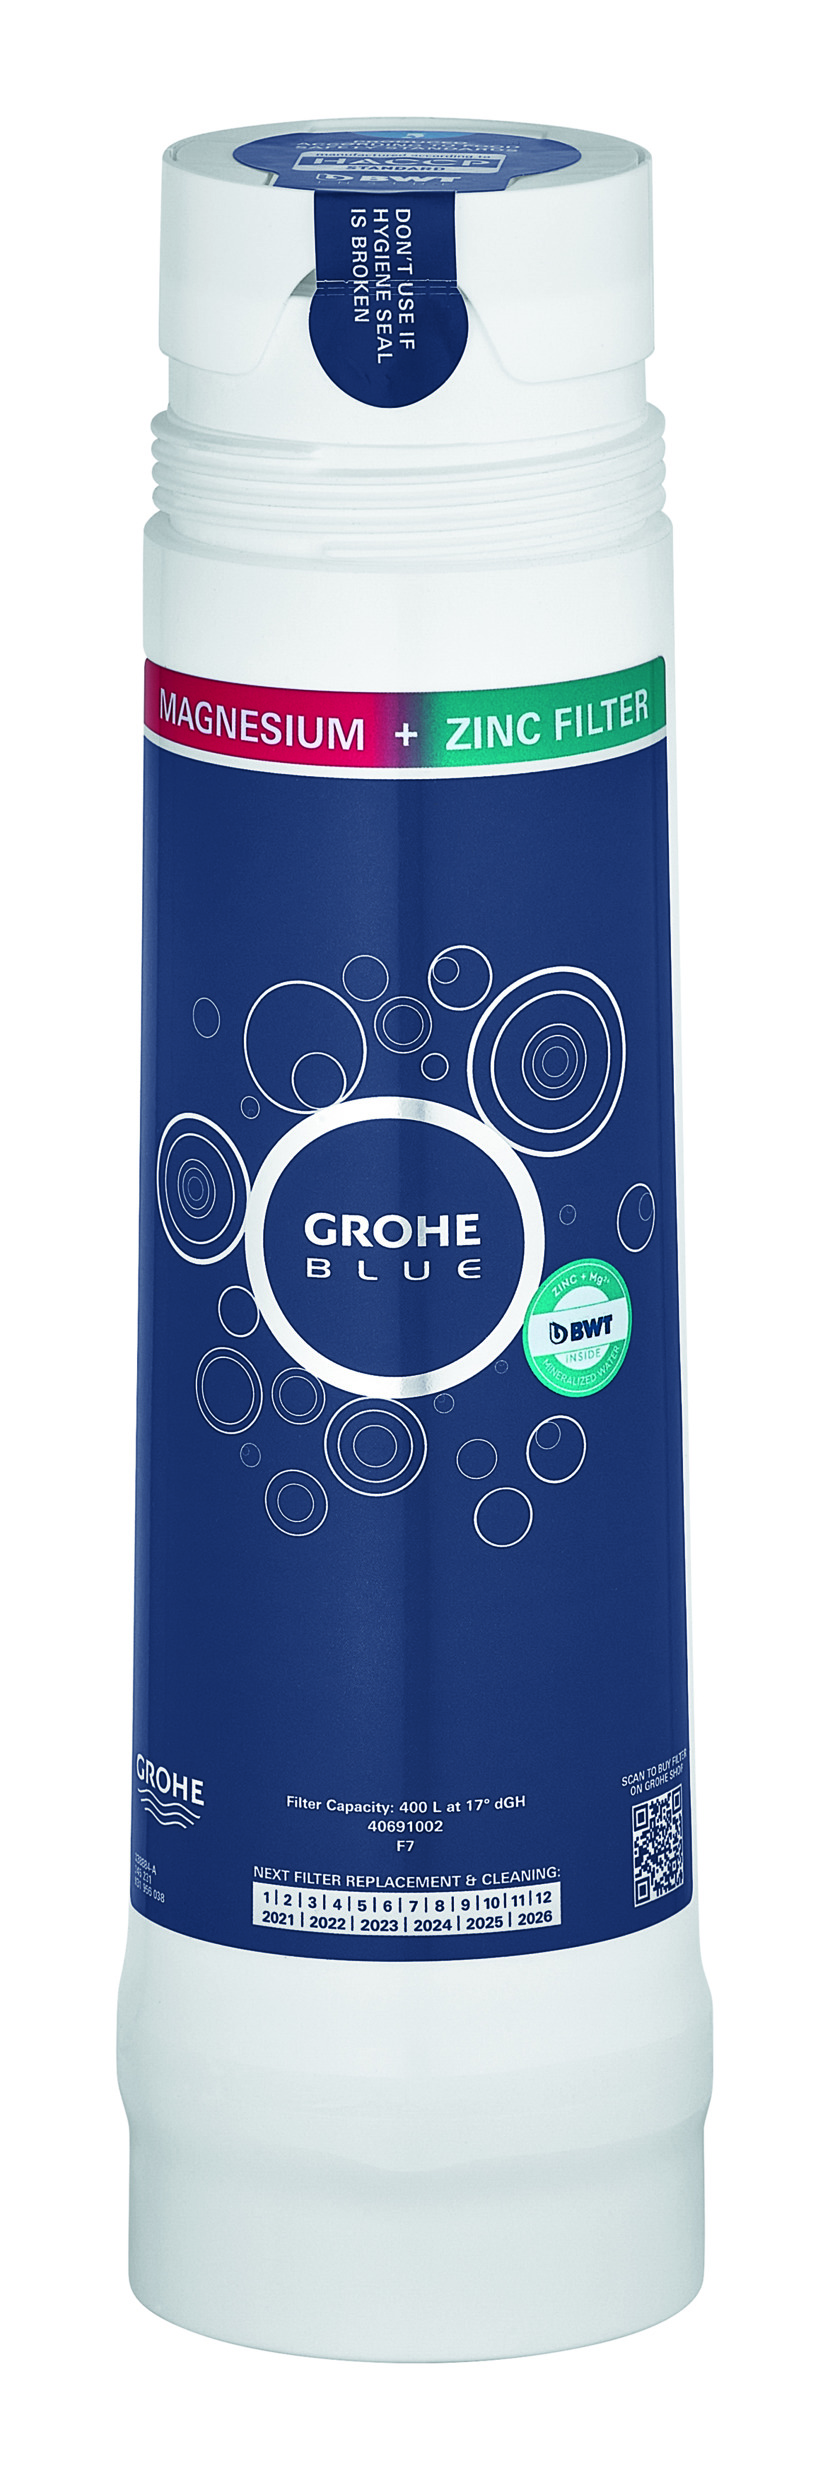 GROHE Blue Magnesium Filter Kitchen B2C